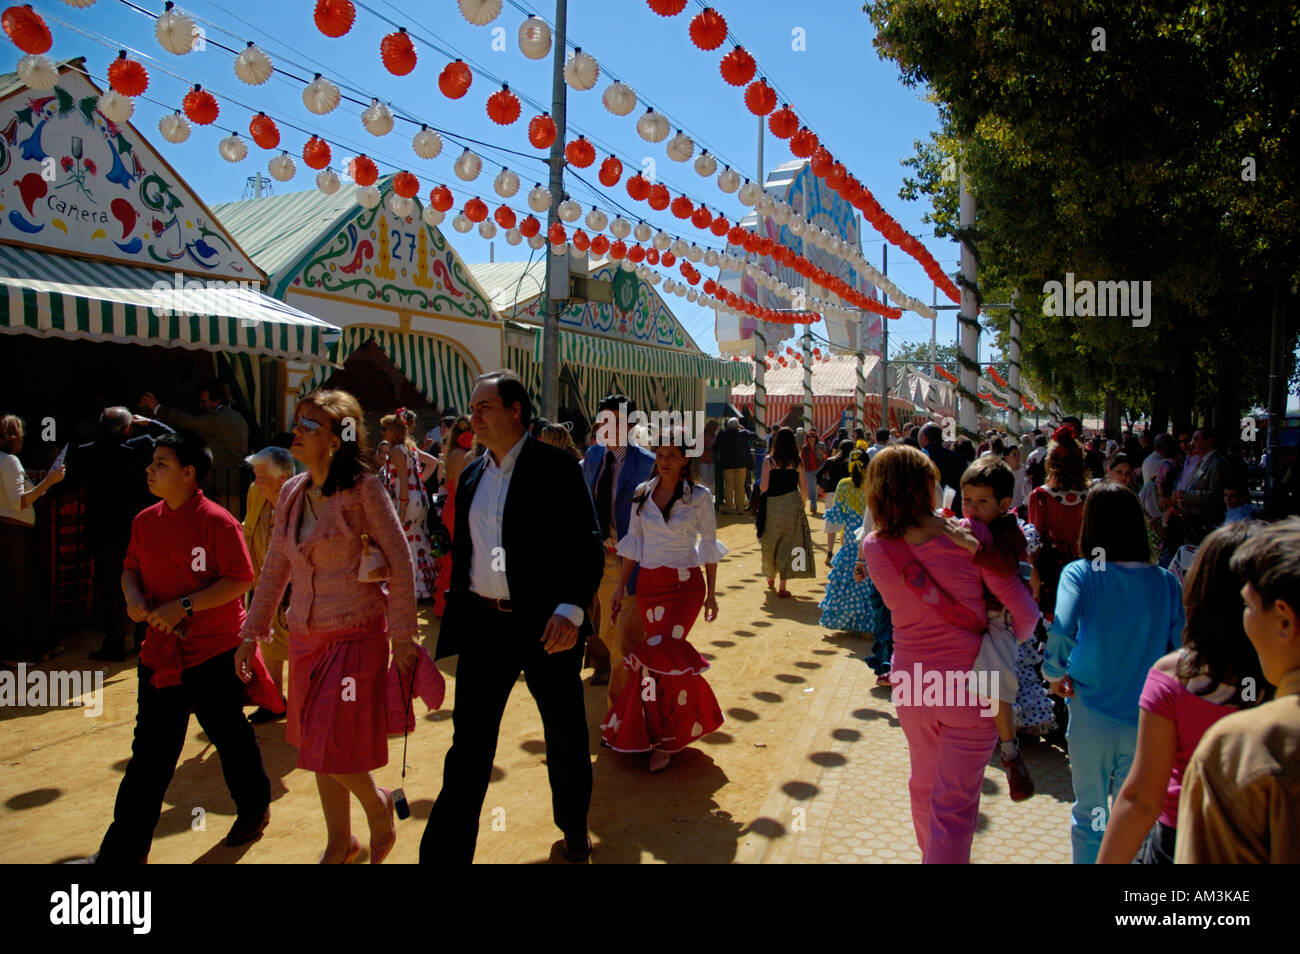 Women in flamenco dress during the Seville Spring Fair in the Los Remedios district, Seville, Andalucia, Spain. Stock Photo